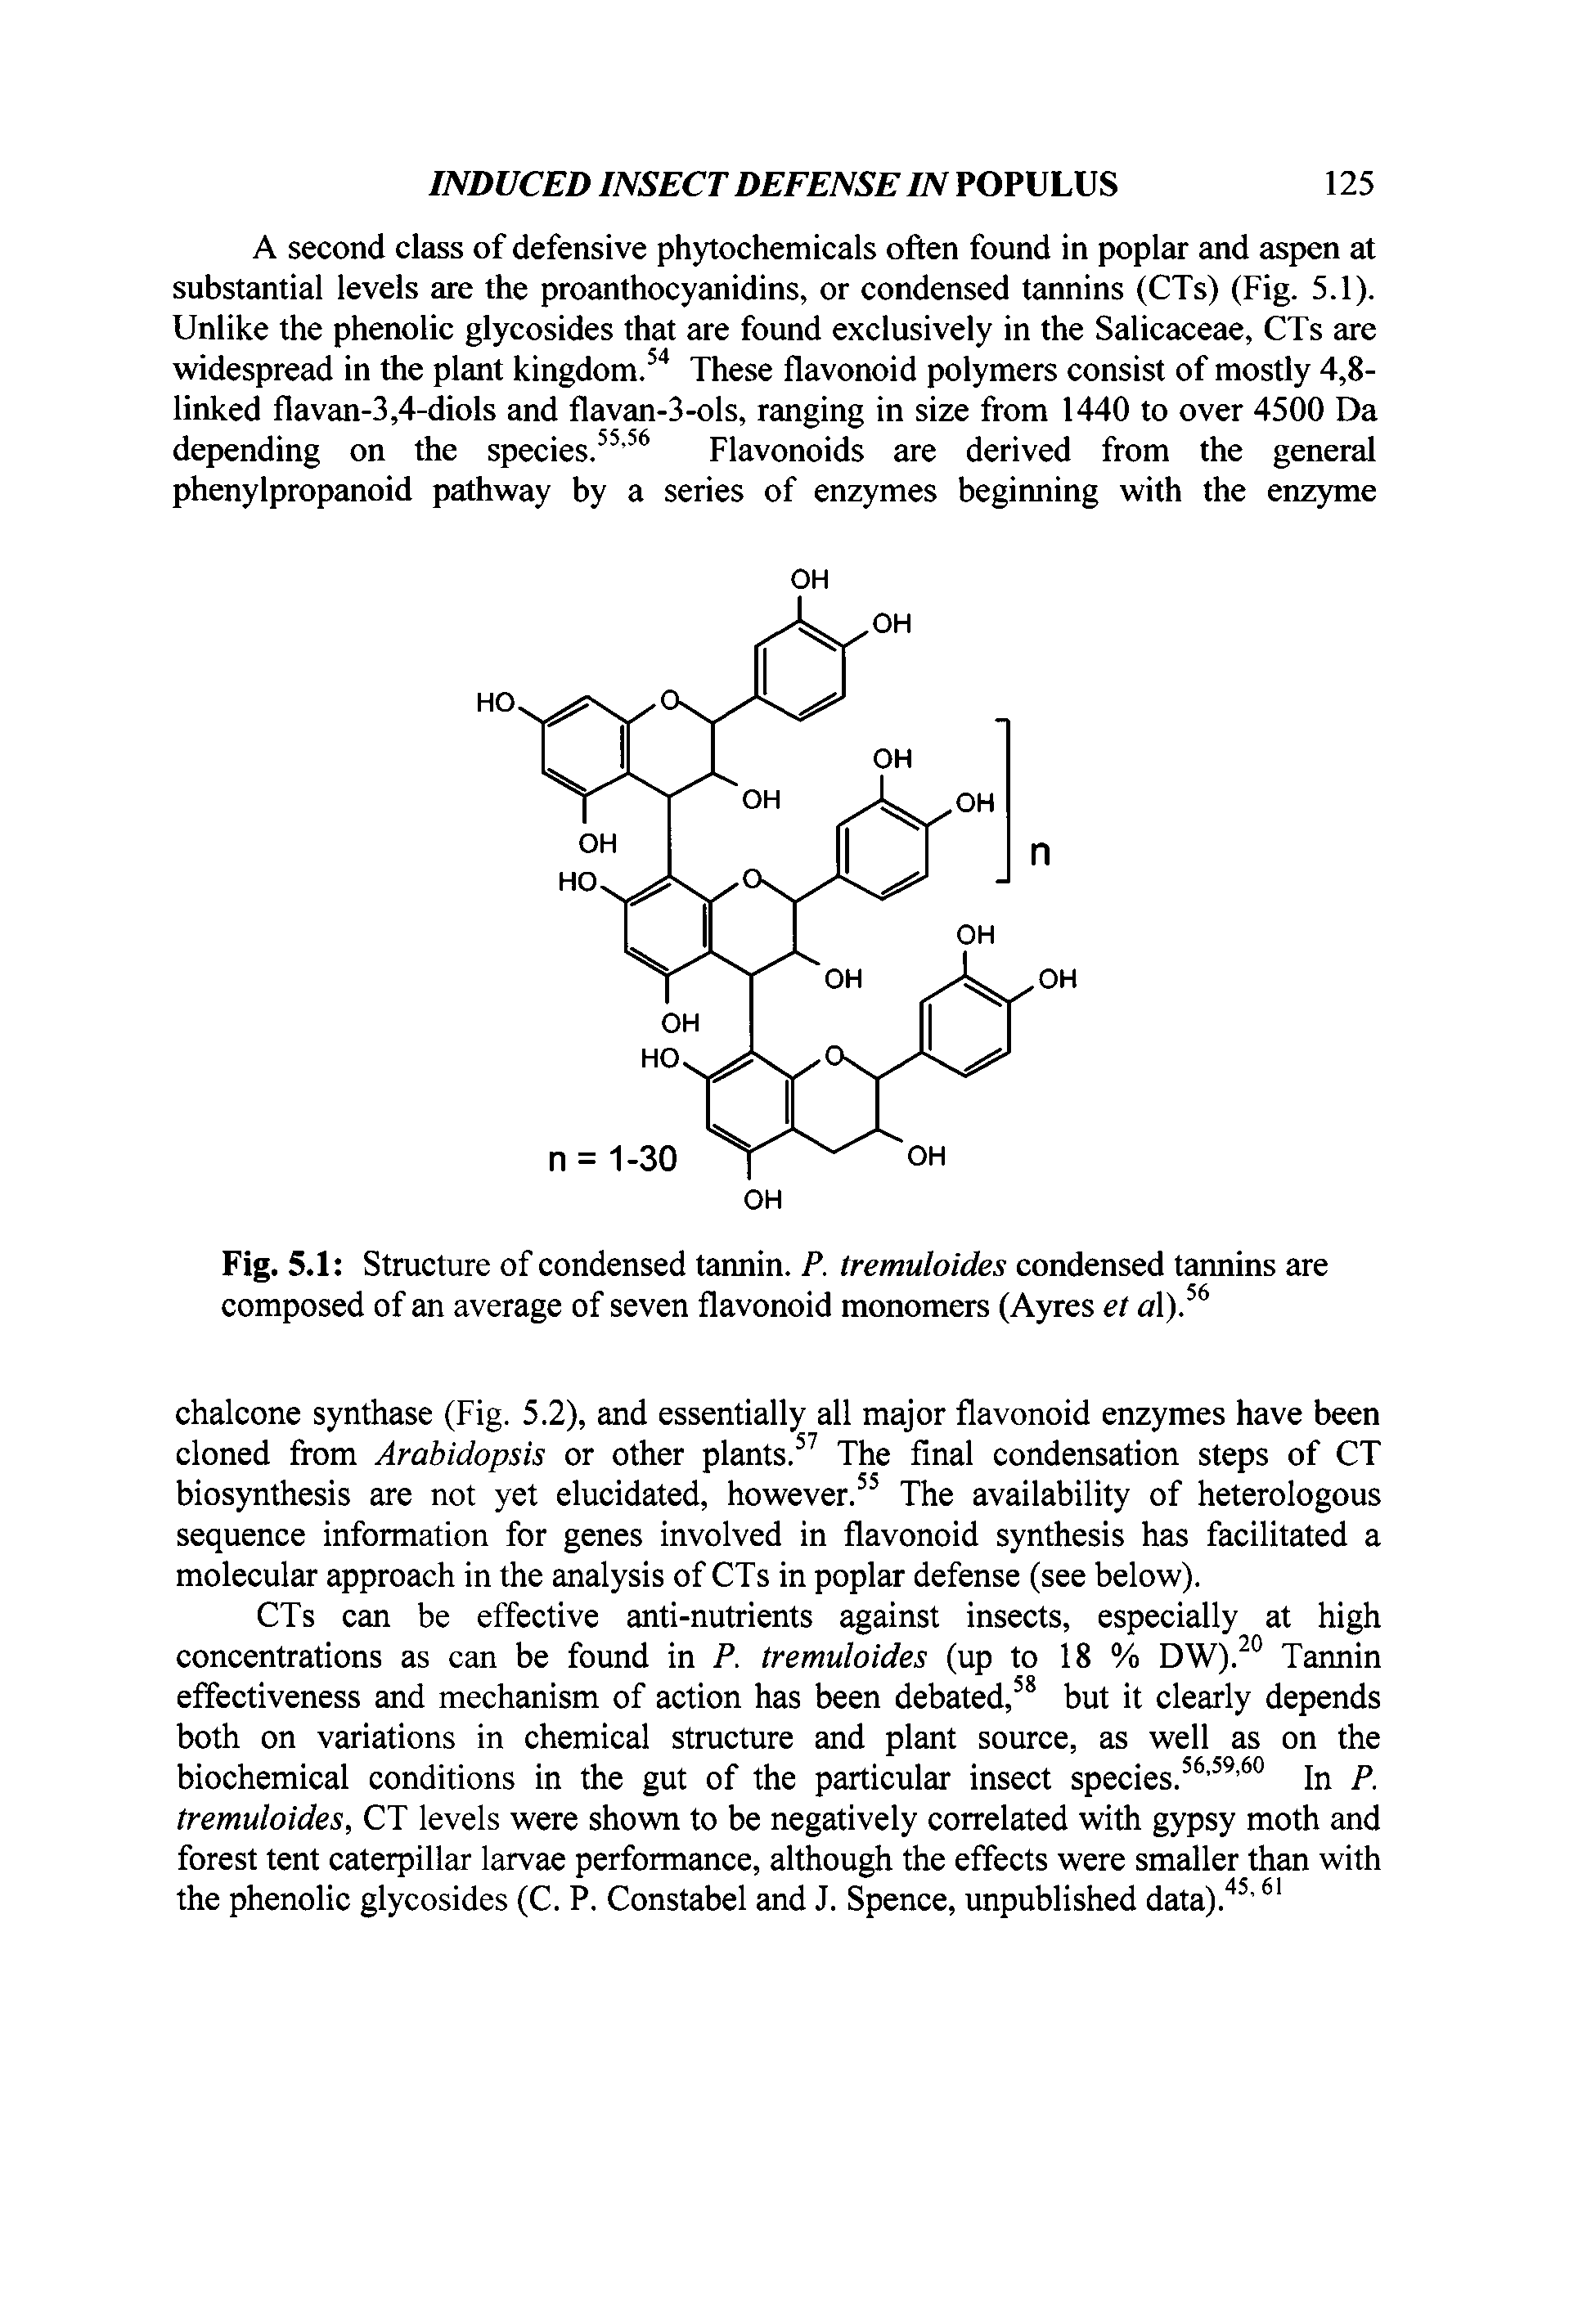 Fig. 5.1 Structure of condensed tannin. P. tremuloides condensed tannins are composed of an average of seven flavonoid monomers (Ayres et a ). ...